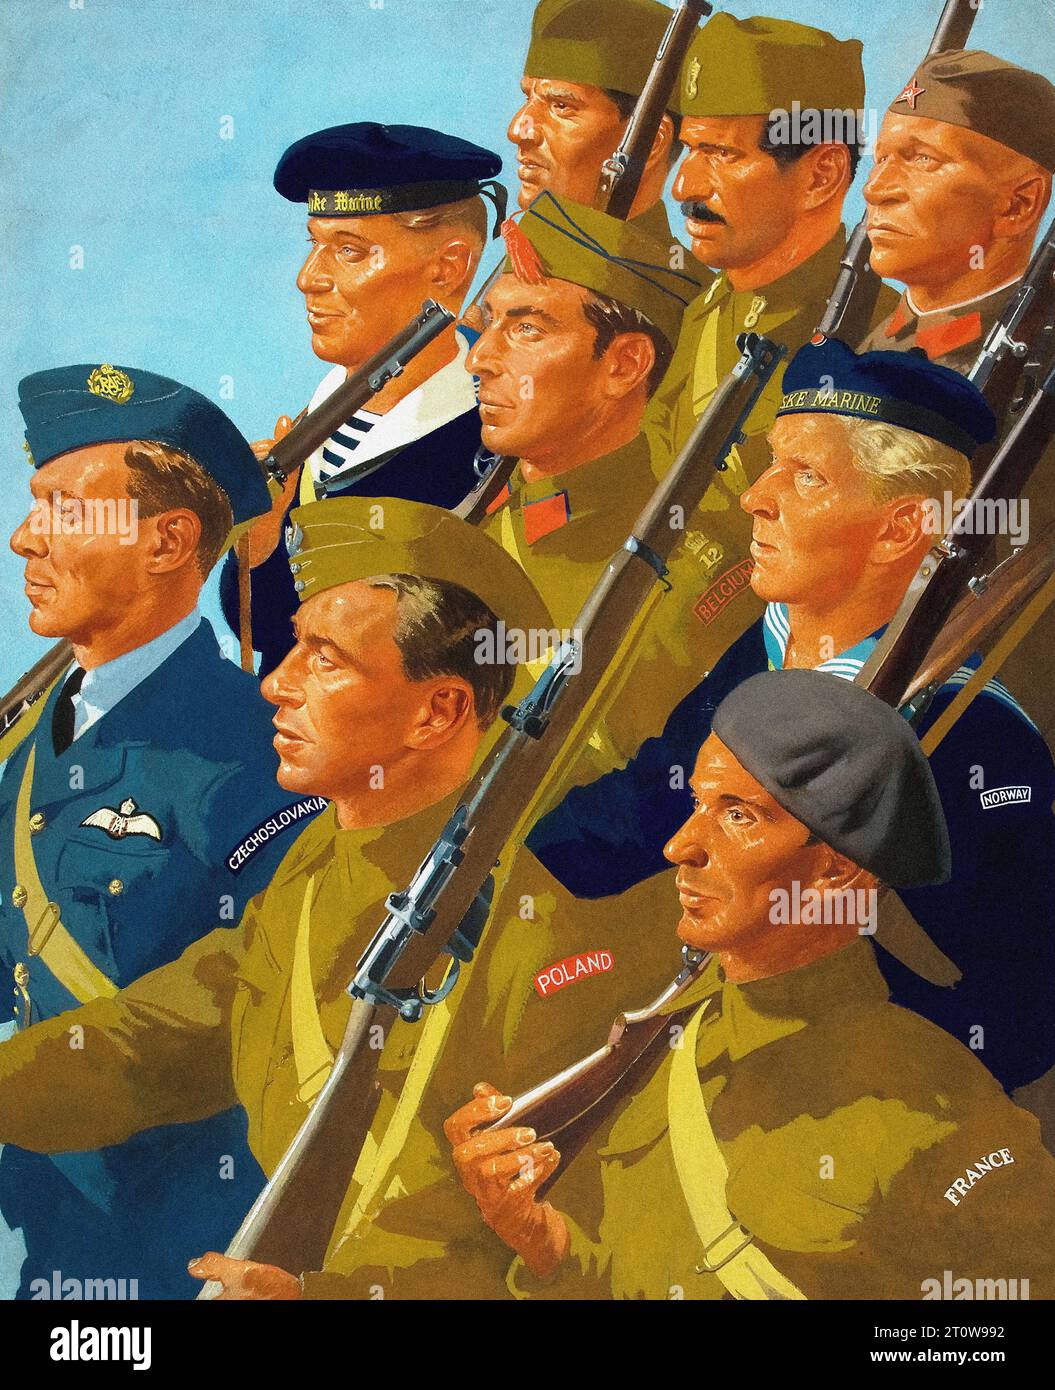 British propaganda , World War II era - “Your courage, Your cheerfulness, Your resolution will bring us victory”  British World War II propaganda poster featuring a group of soldiers from different countries marching together with their rifles. The countries represented are Great Britain, France, Poland, Czechoslovakia, Norway and Yugoslavia. The soldiers are depicted in a stylized, graphic manner with bold colors and strong lines against a bright blue sky. The text on the poster reads “Your courage, Your cheerfulness, Your resolution will bring us victory”. Stock Photo